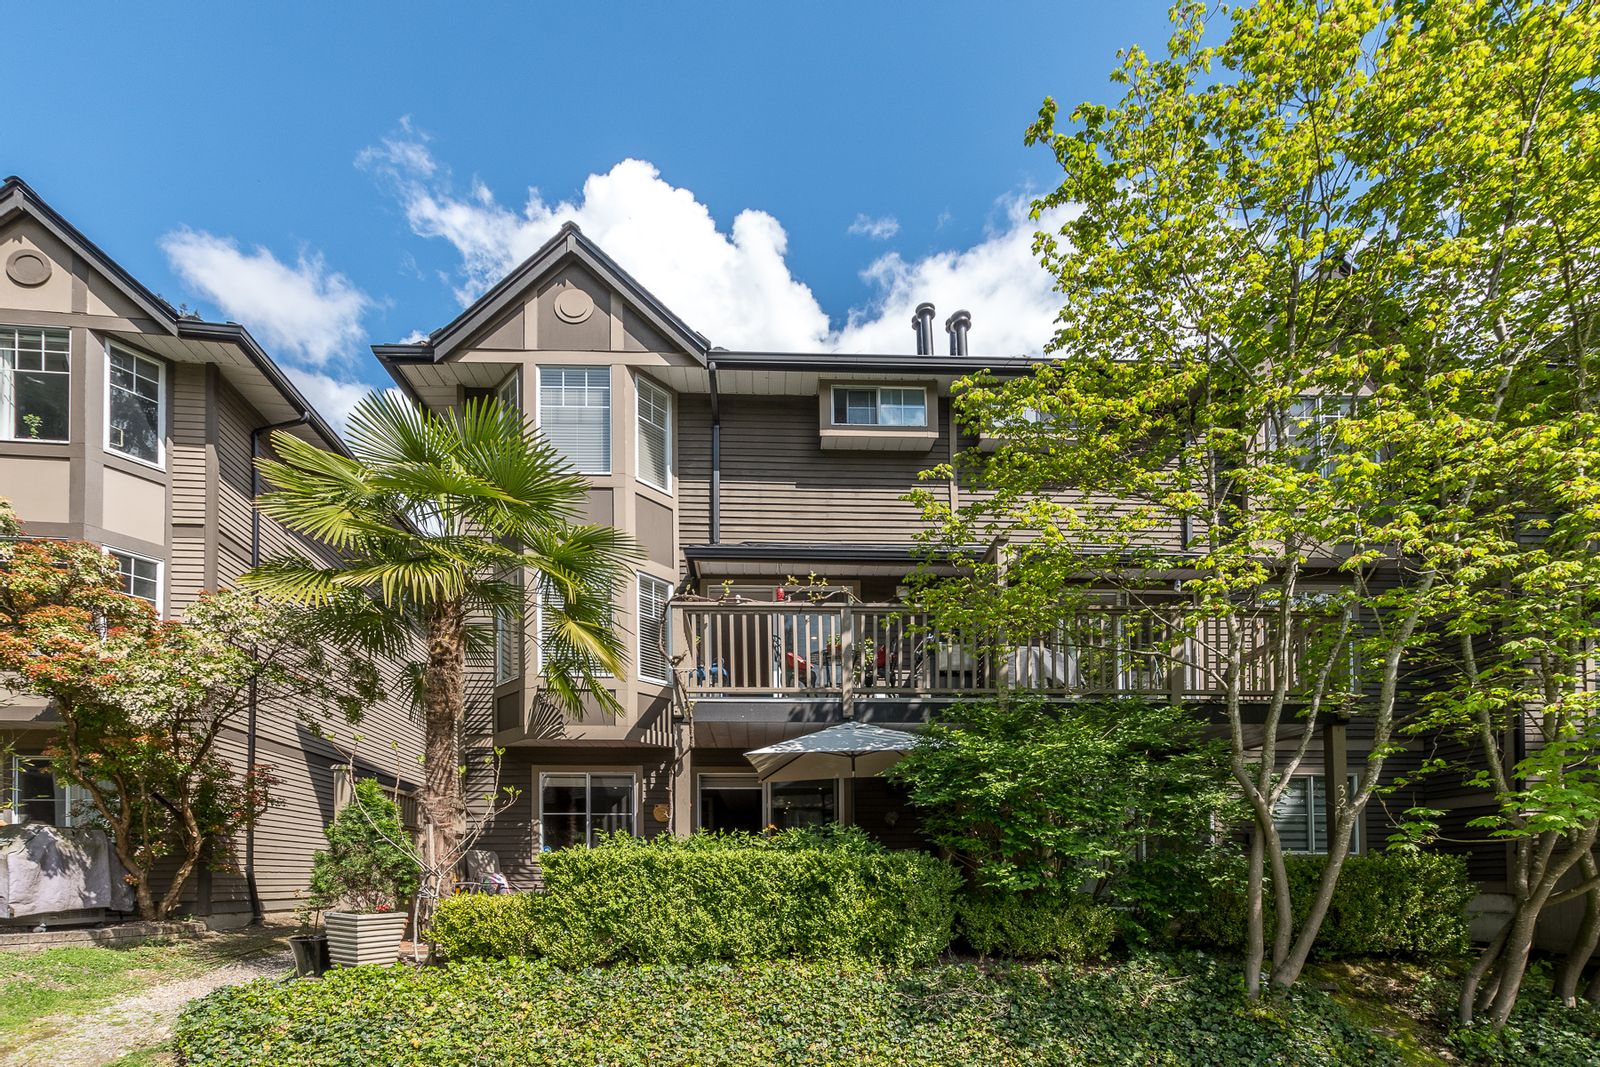 New Listing at 33-795 Noons Creek Drive in Port Moody